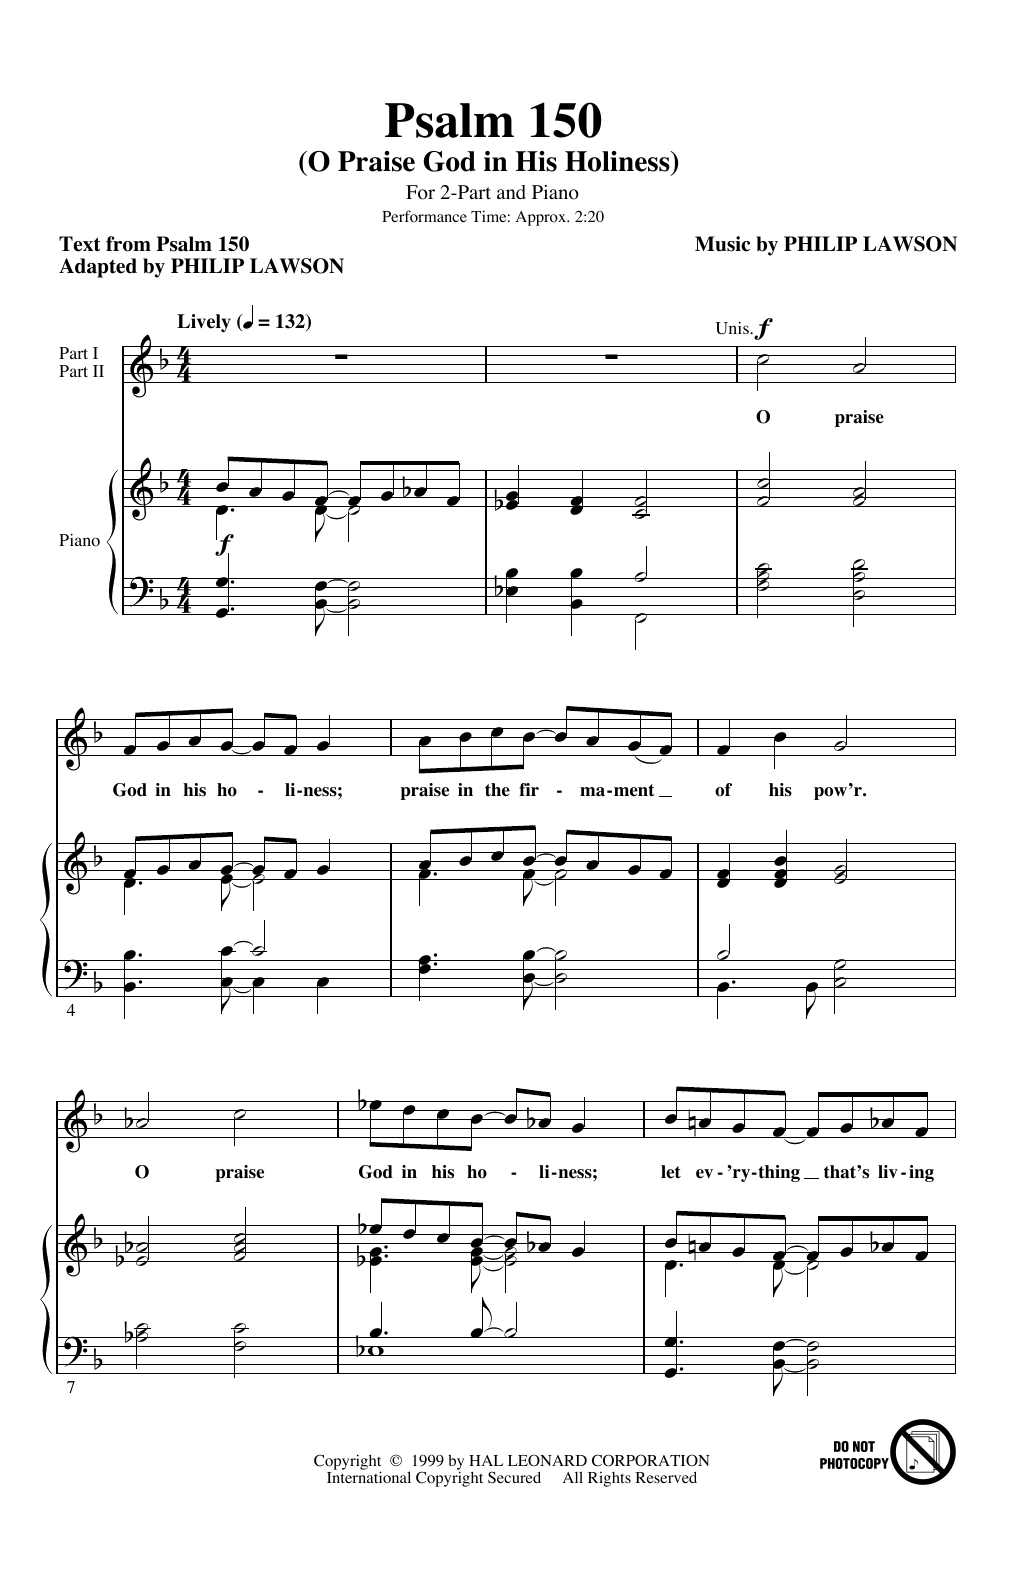 Download Philip Lawson Psalm 150 (O Praise God in His Holiness Sheet Music